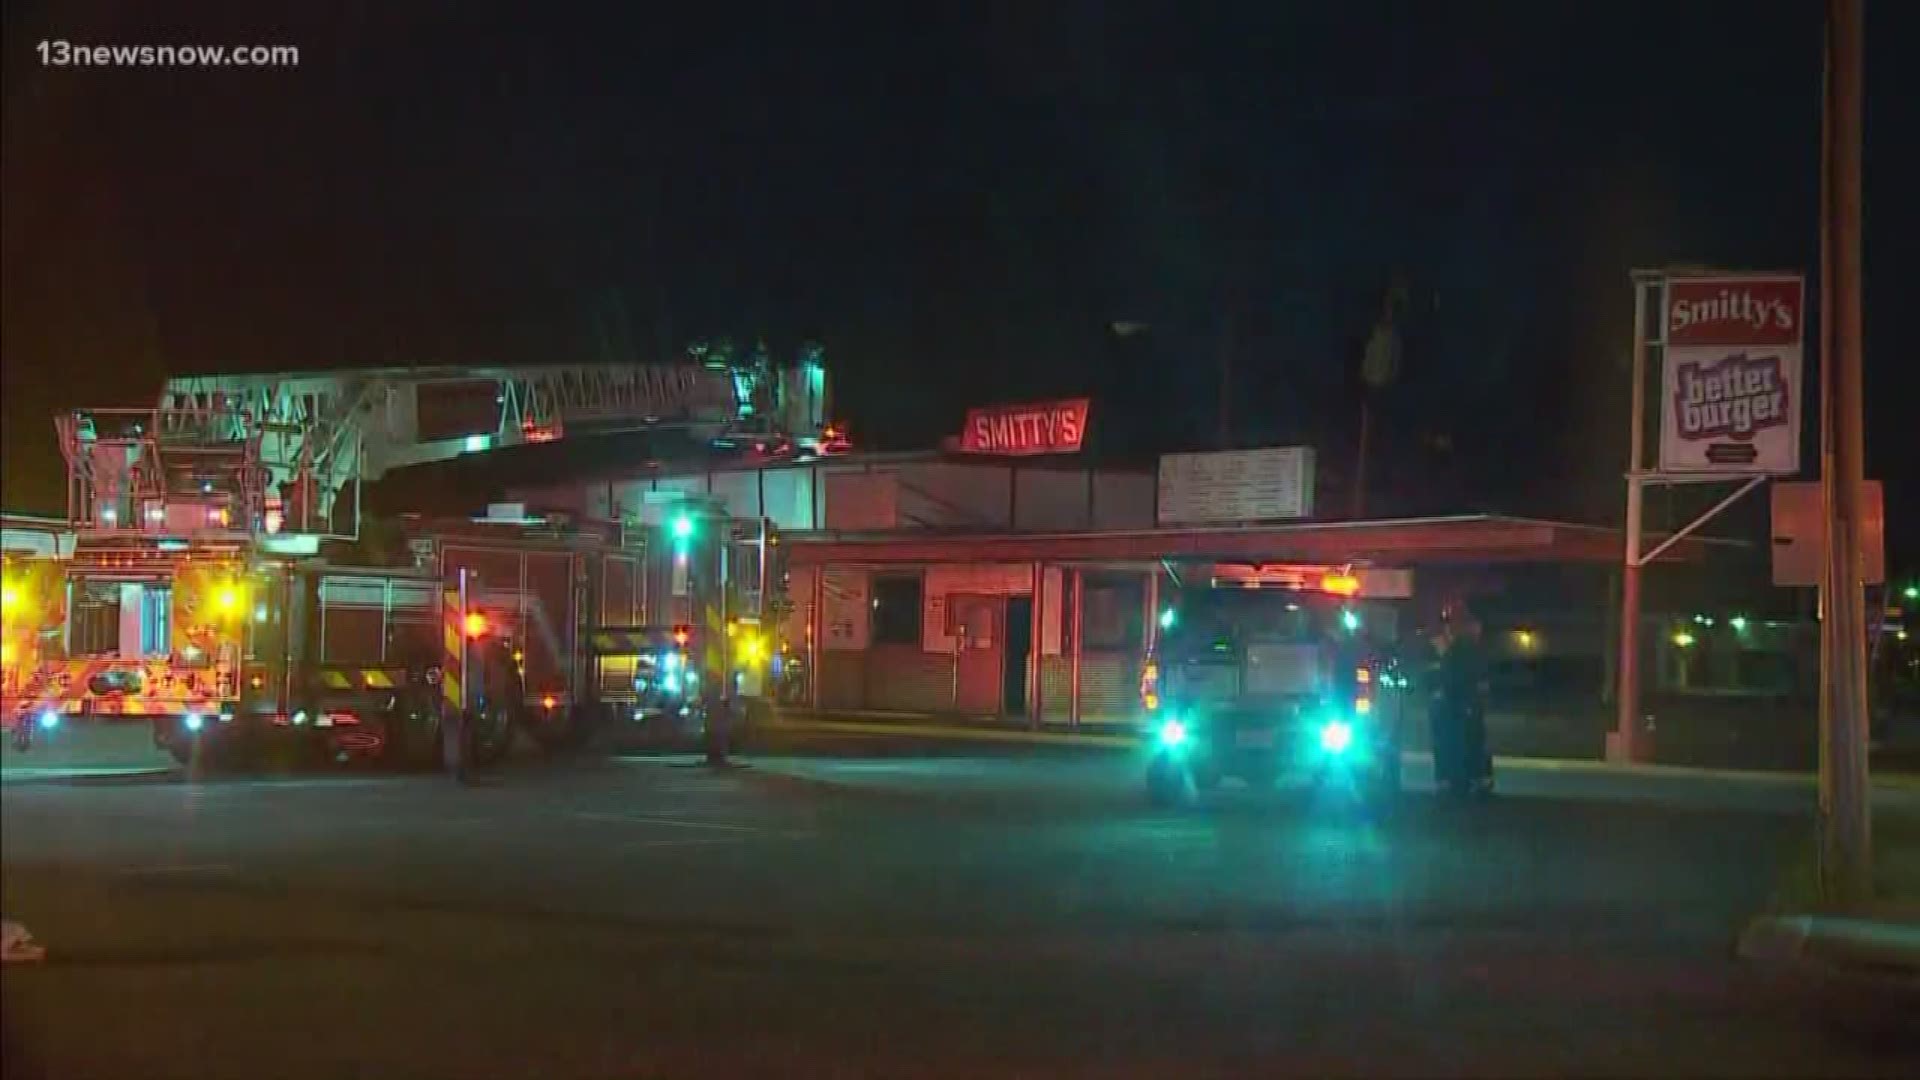 Crews were on scene of a fire at Smitty's Better Burger in Hampton.